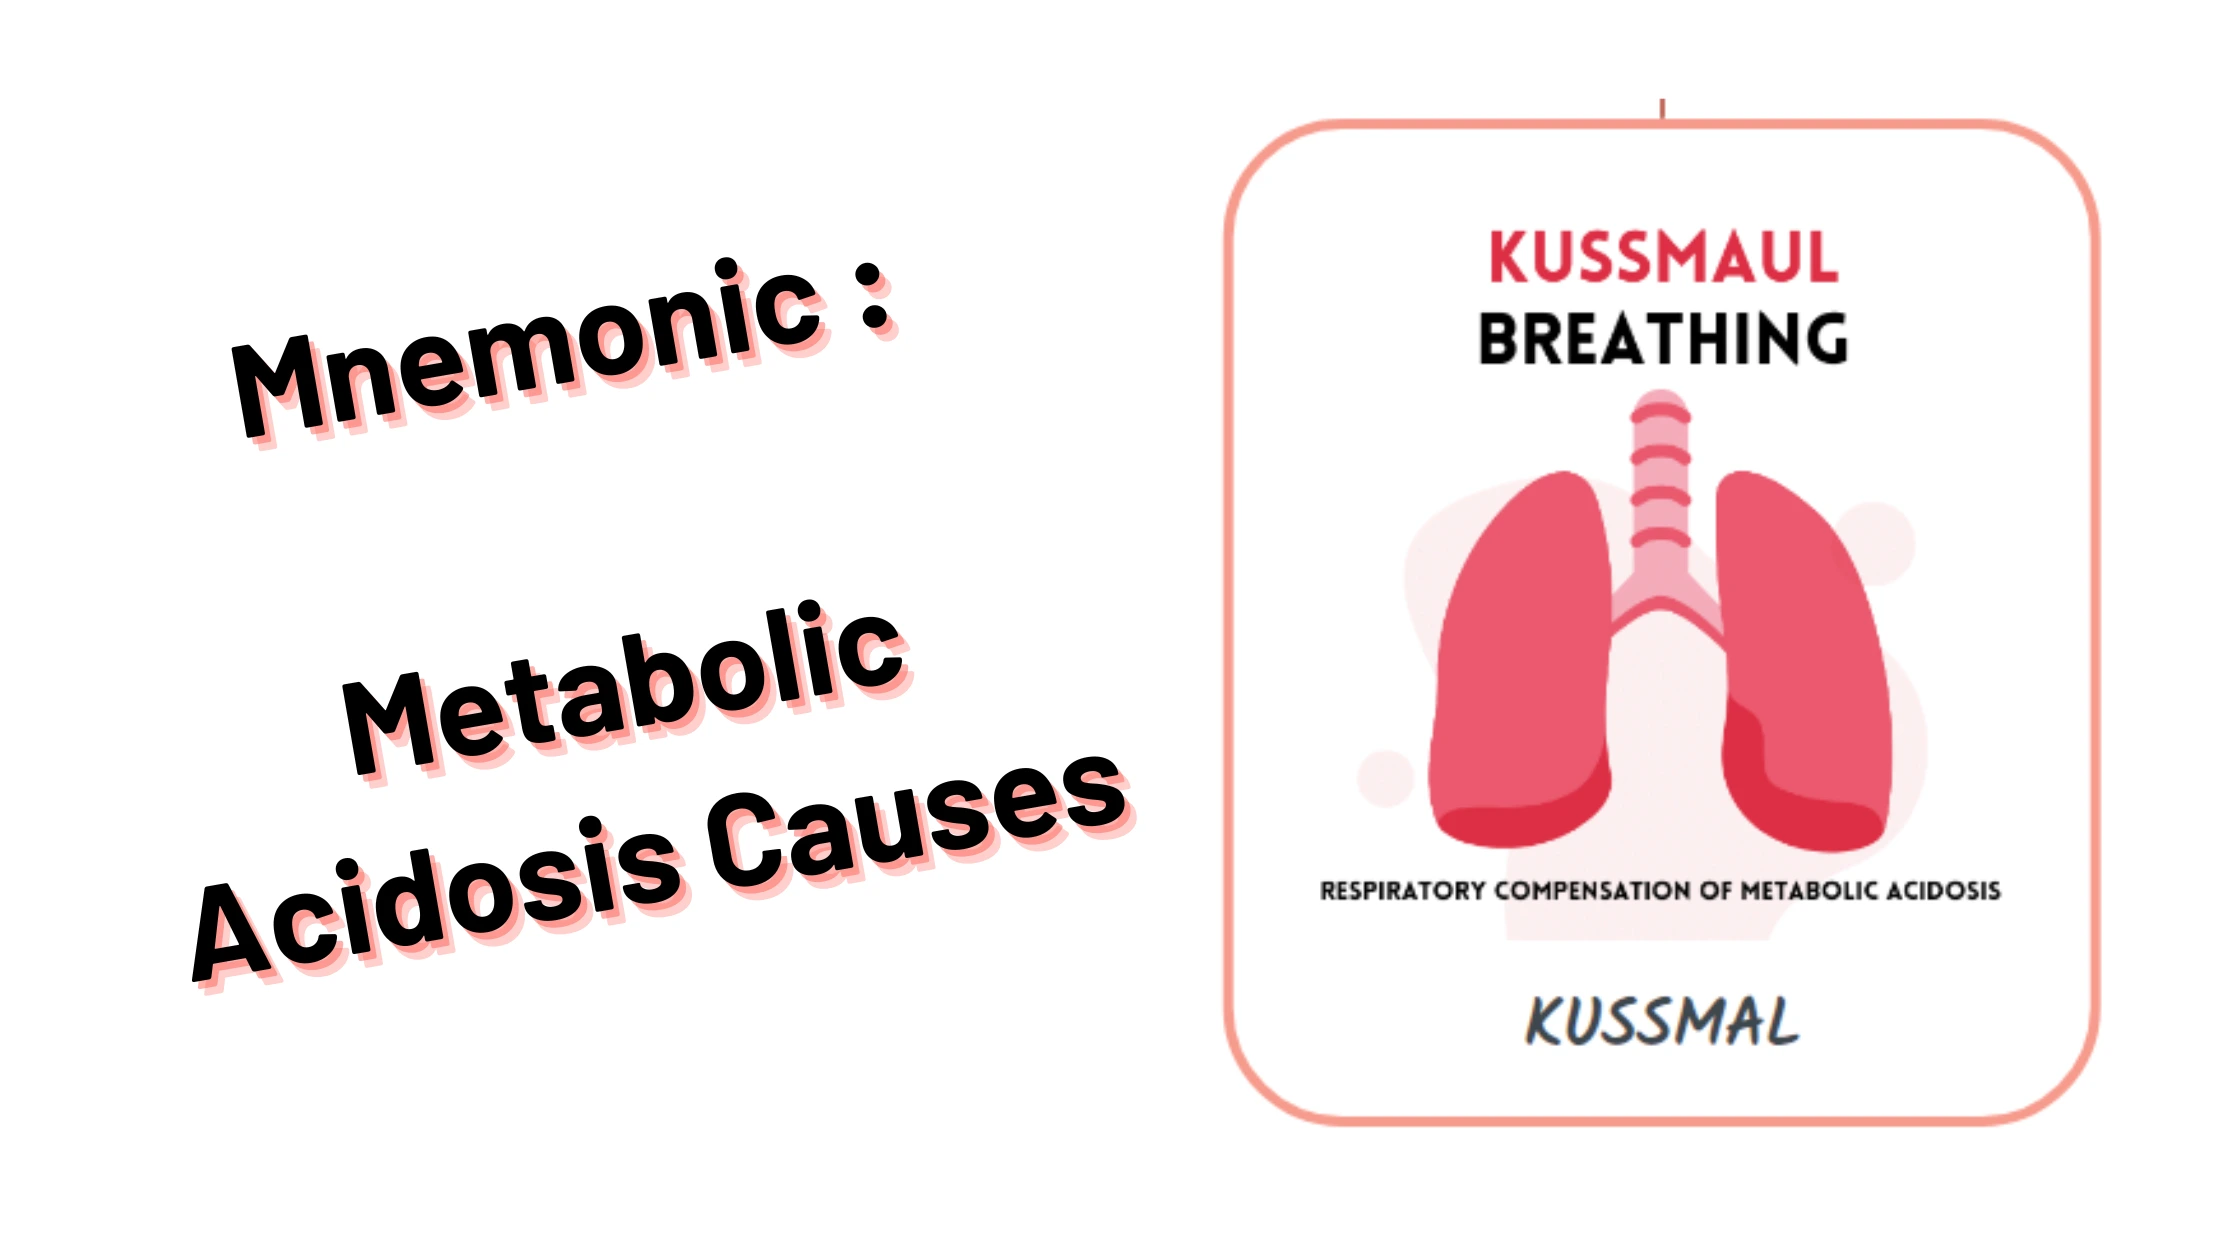 You are currently viewing [Very Cool] Mnemonic : Metabolic Acidosis Causes